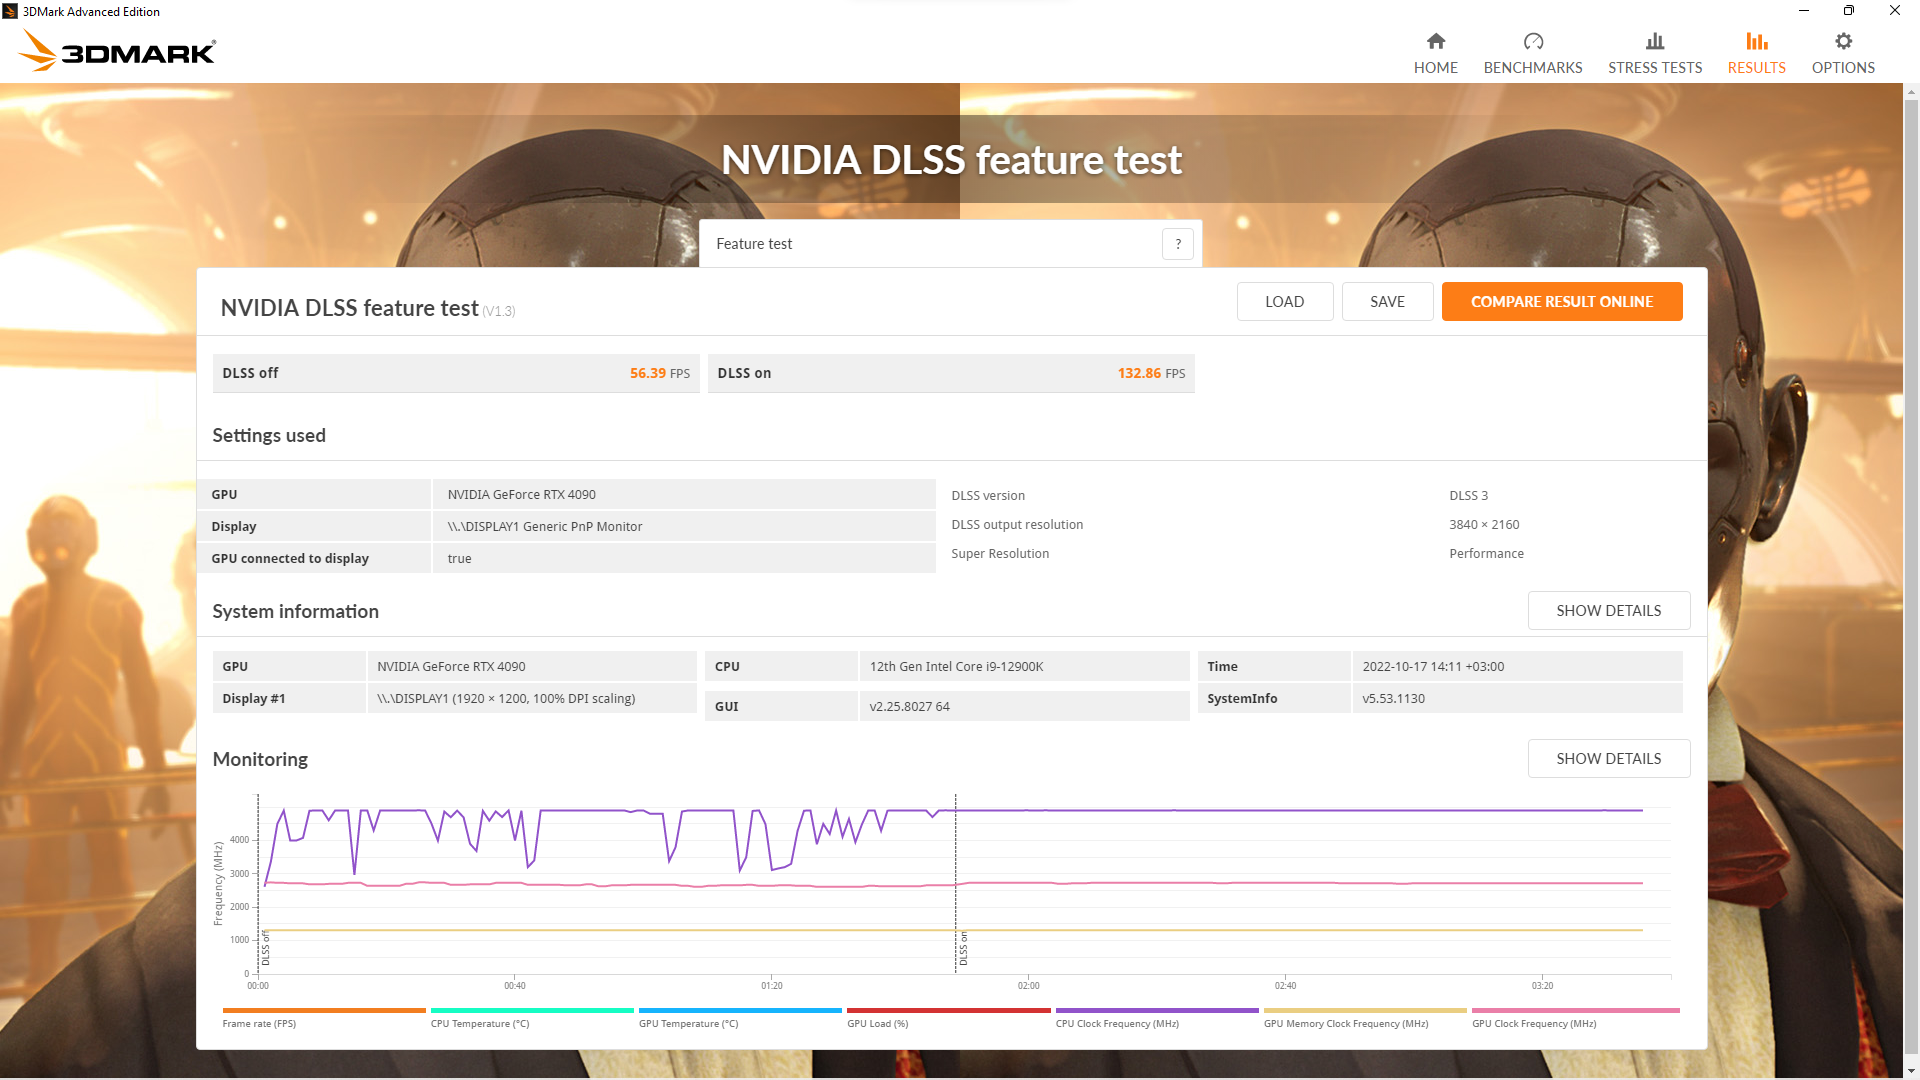 3DMark NVIDIA DLSS feature test DLSS 3 update results page screenshot